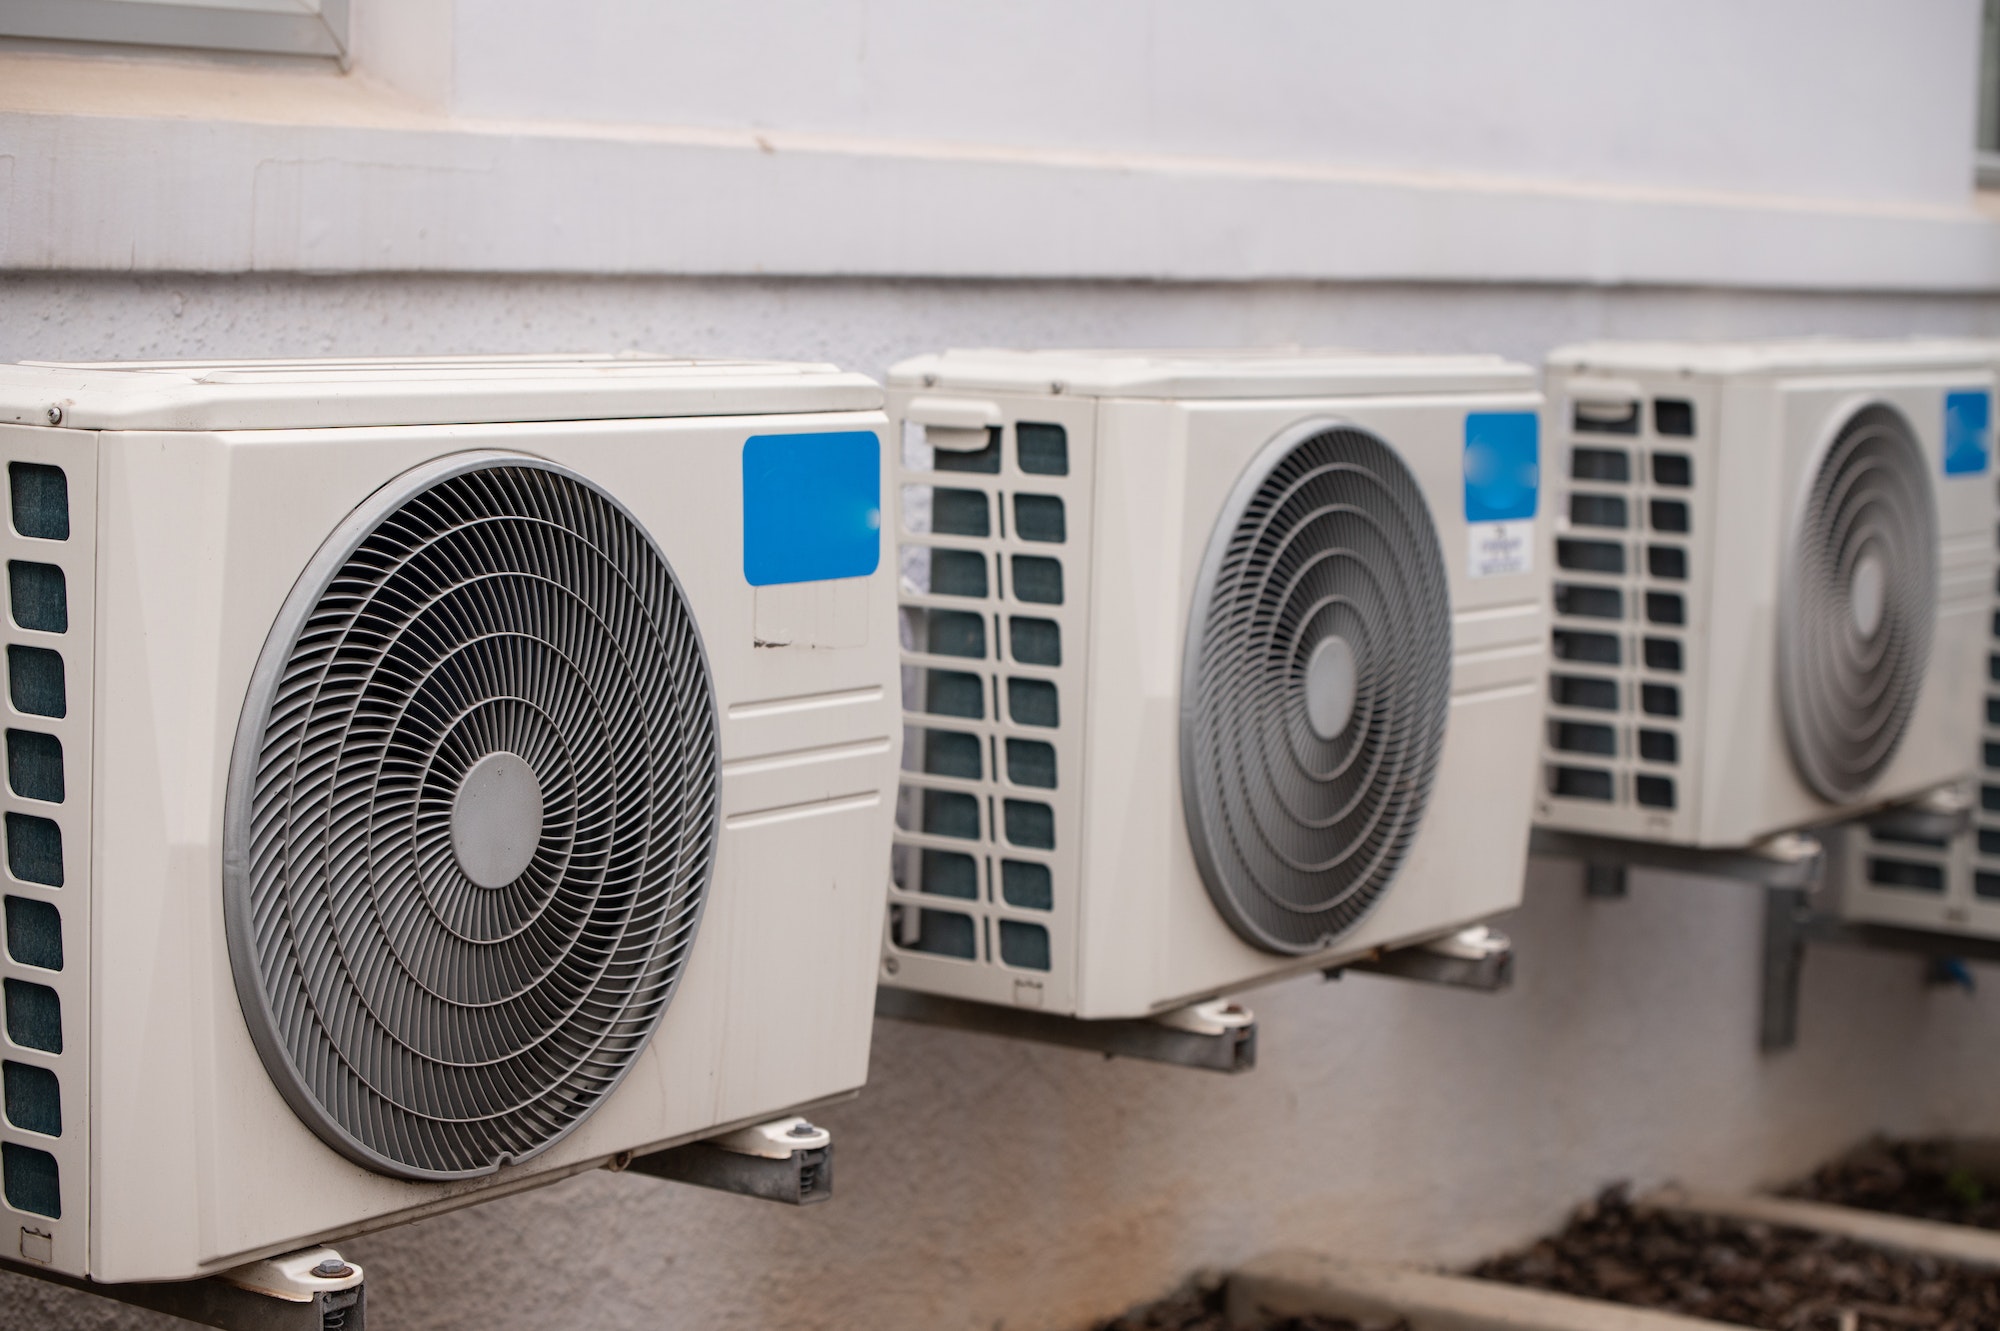 Air conditioners mounted on wall outdoors